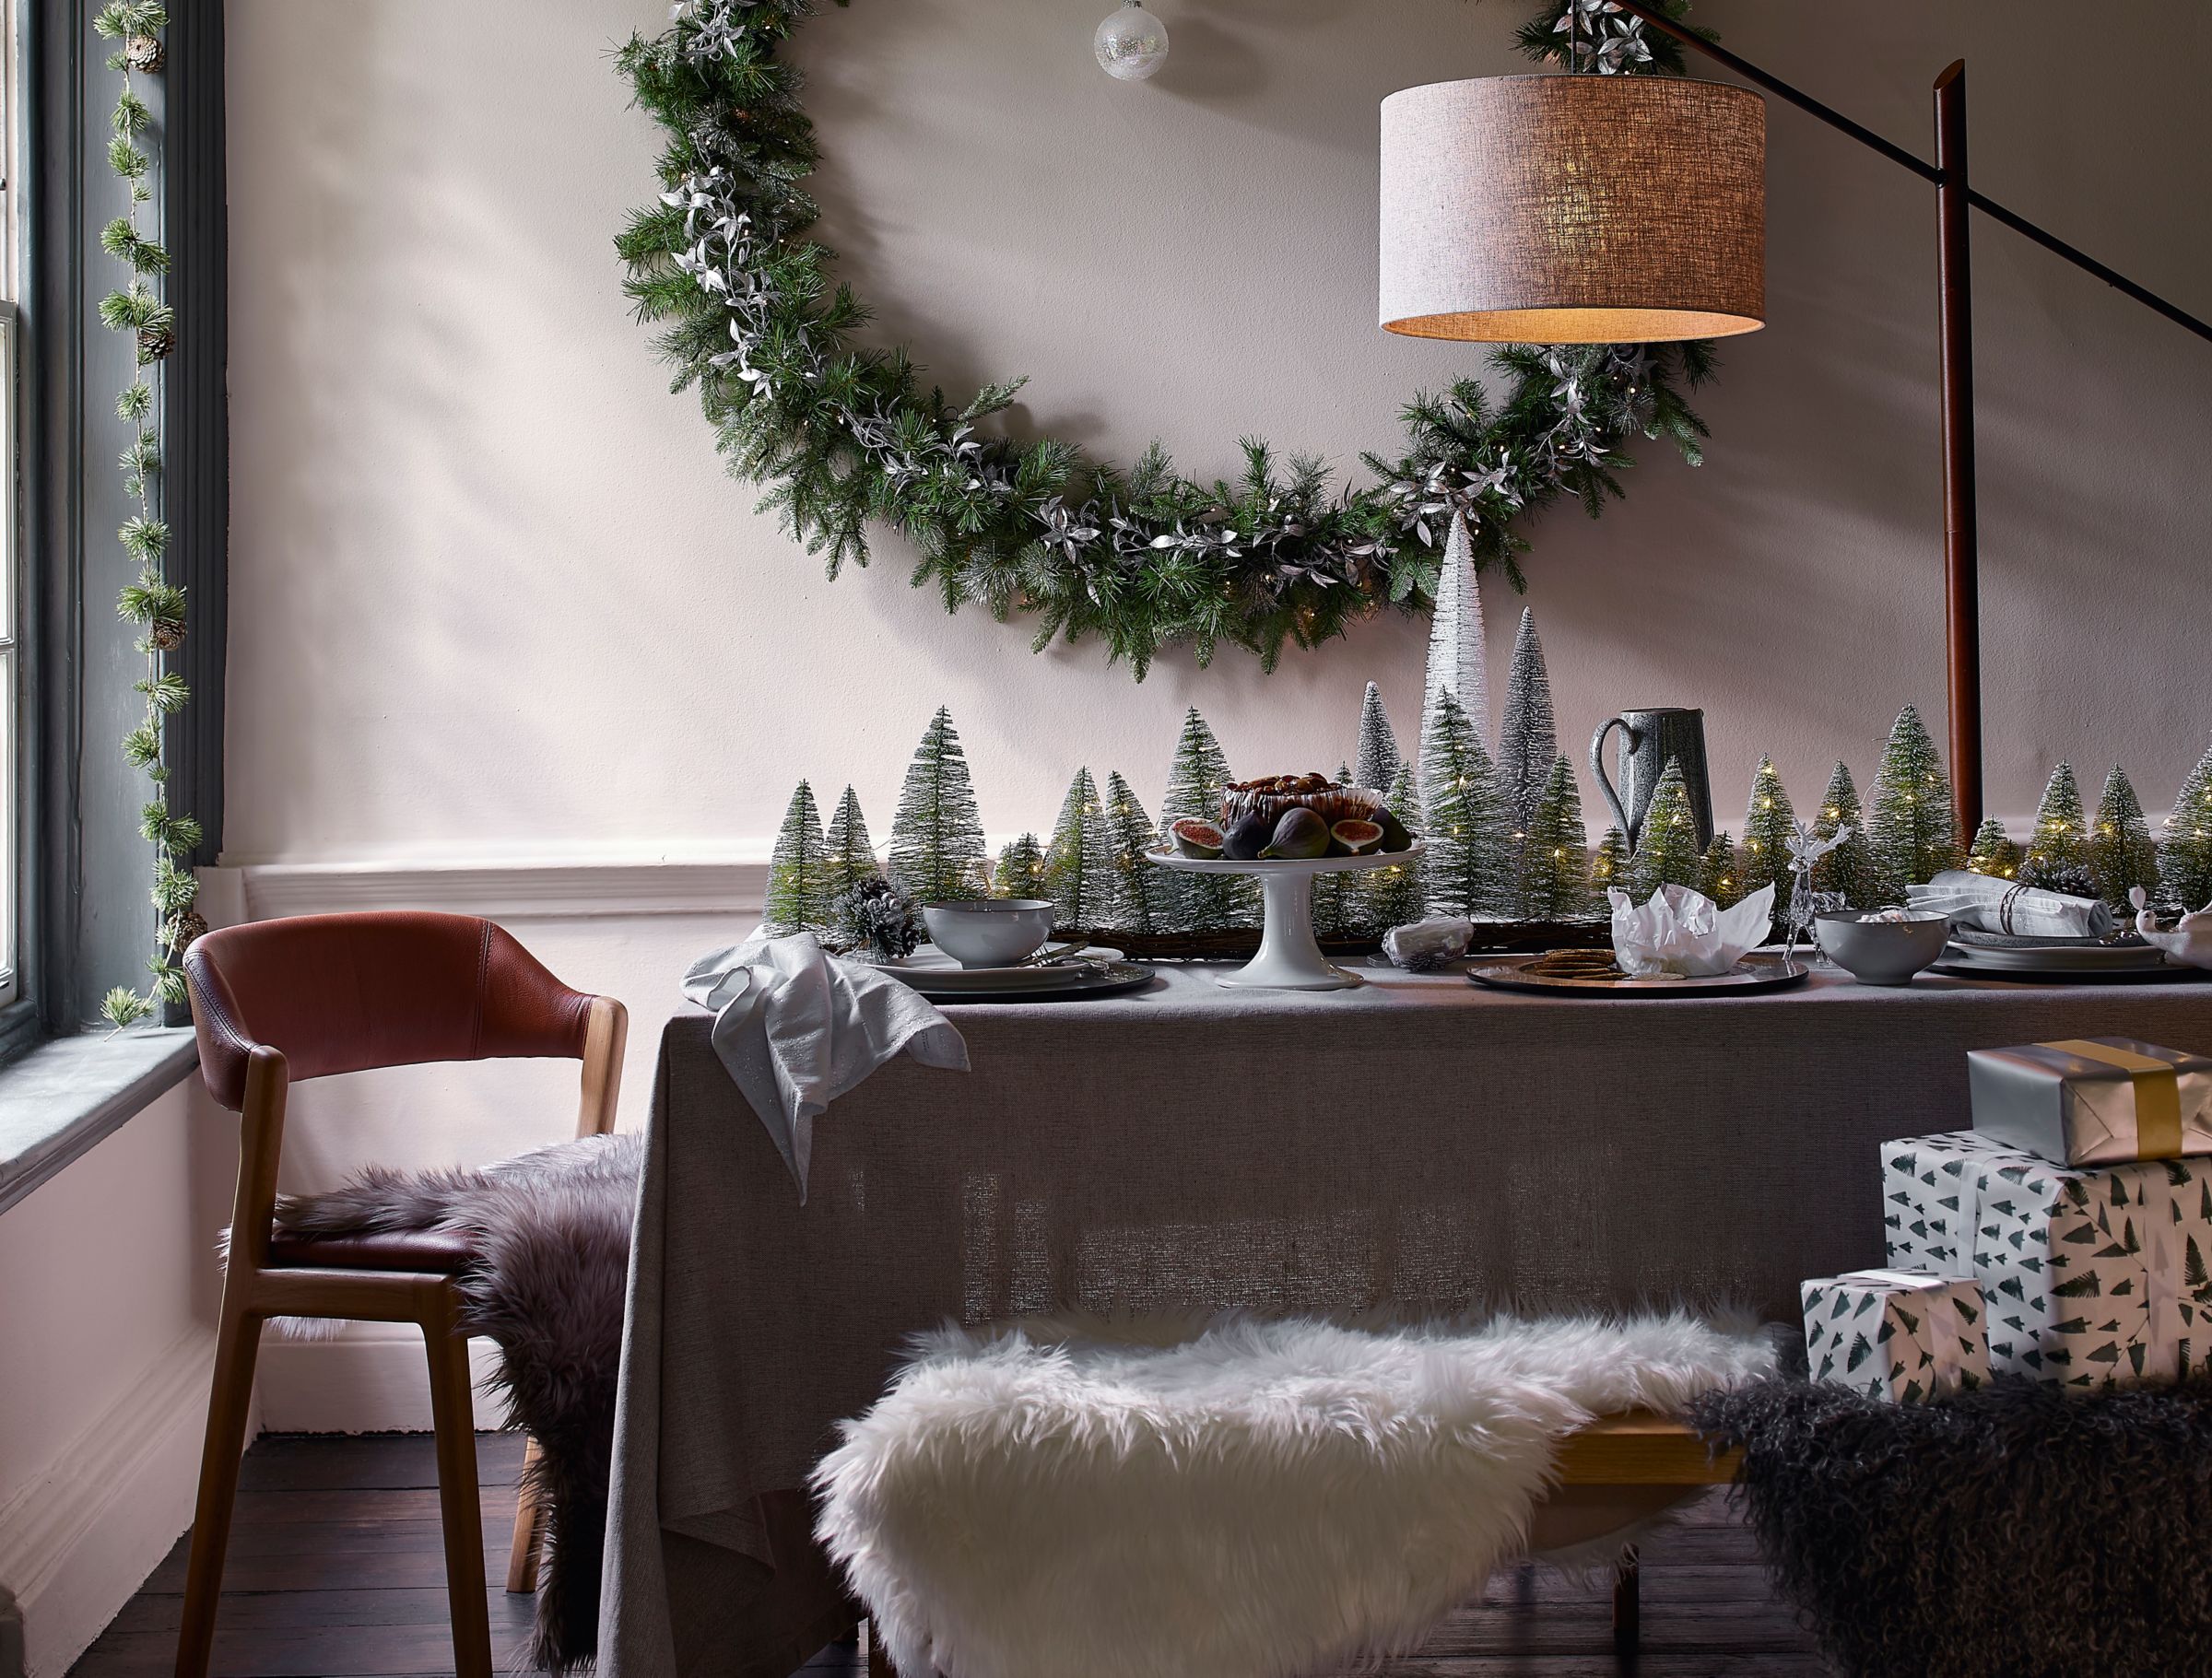 Make your table centre the star of Christmas